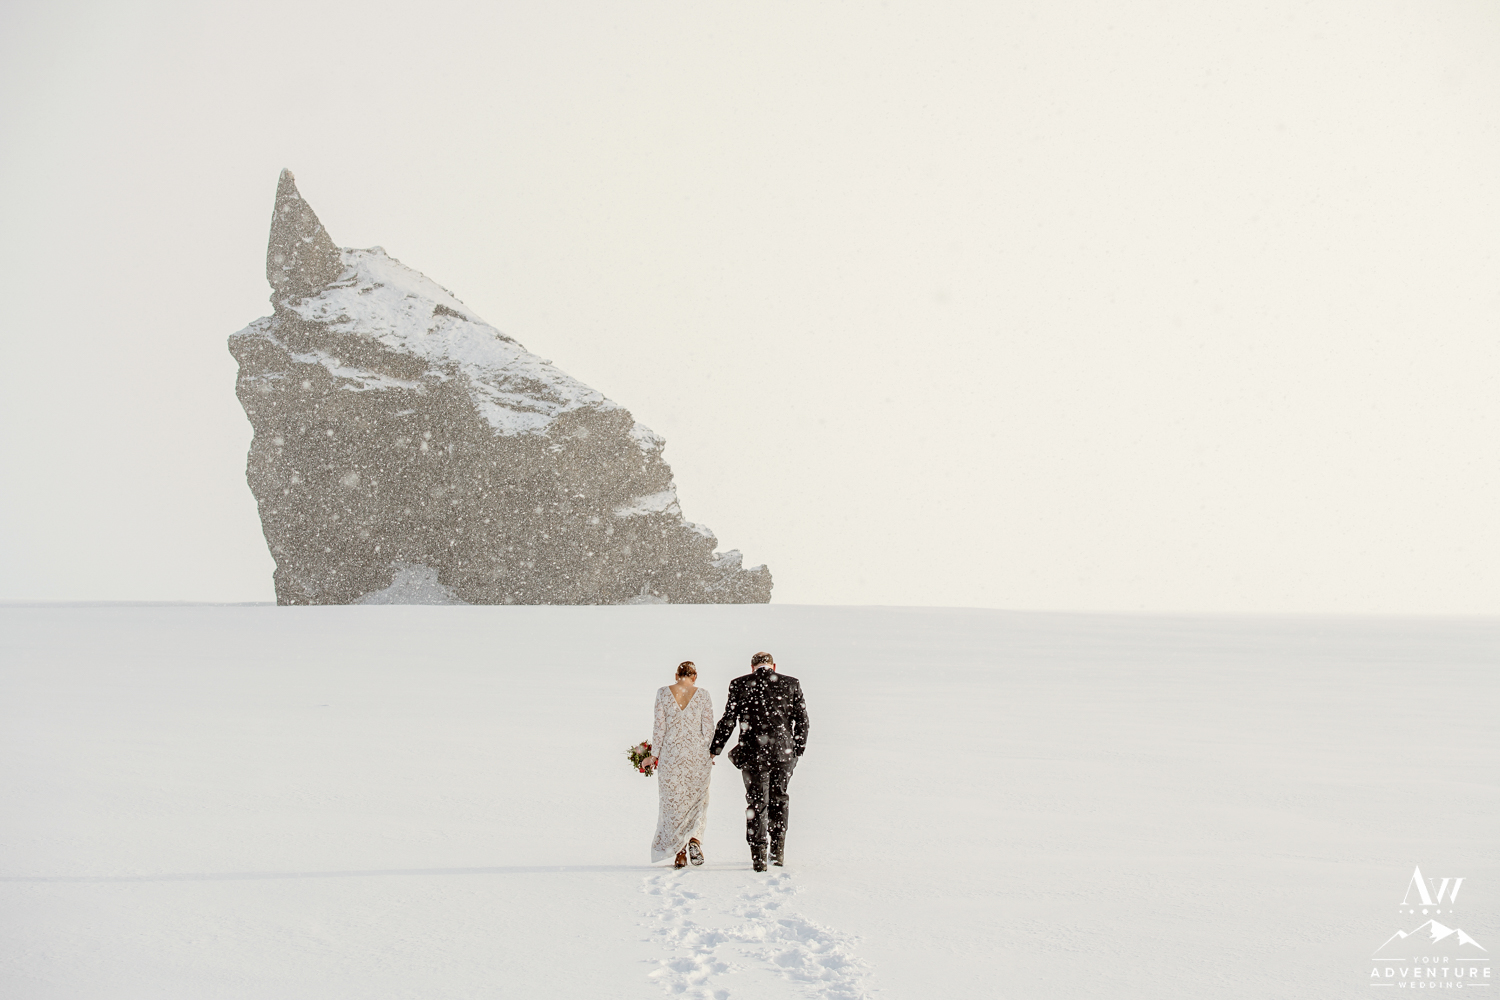 The Importance of Welcome Bags for Iceland Weddings